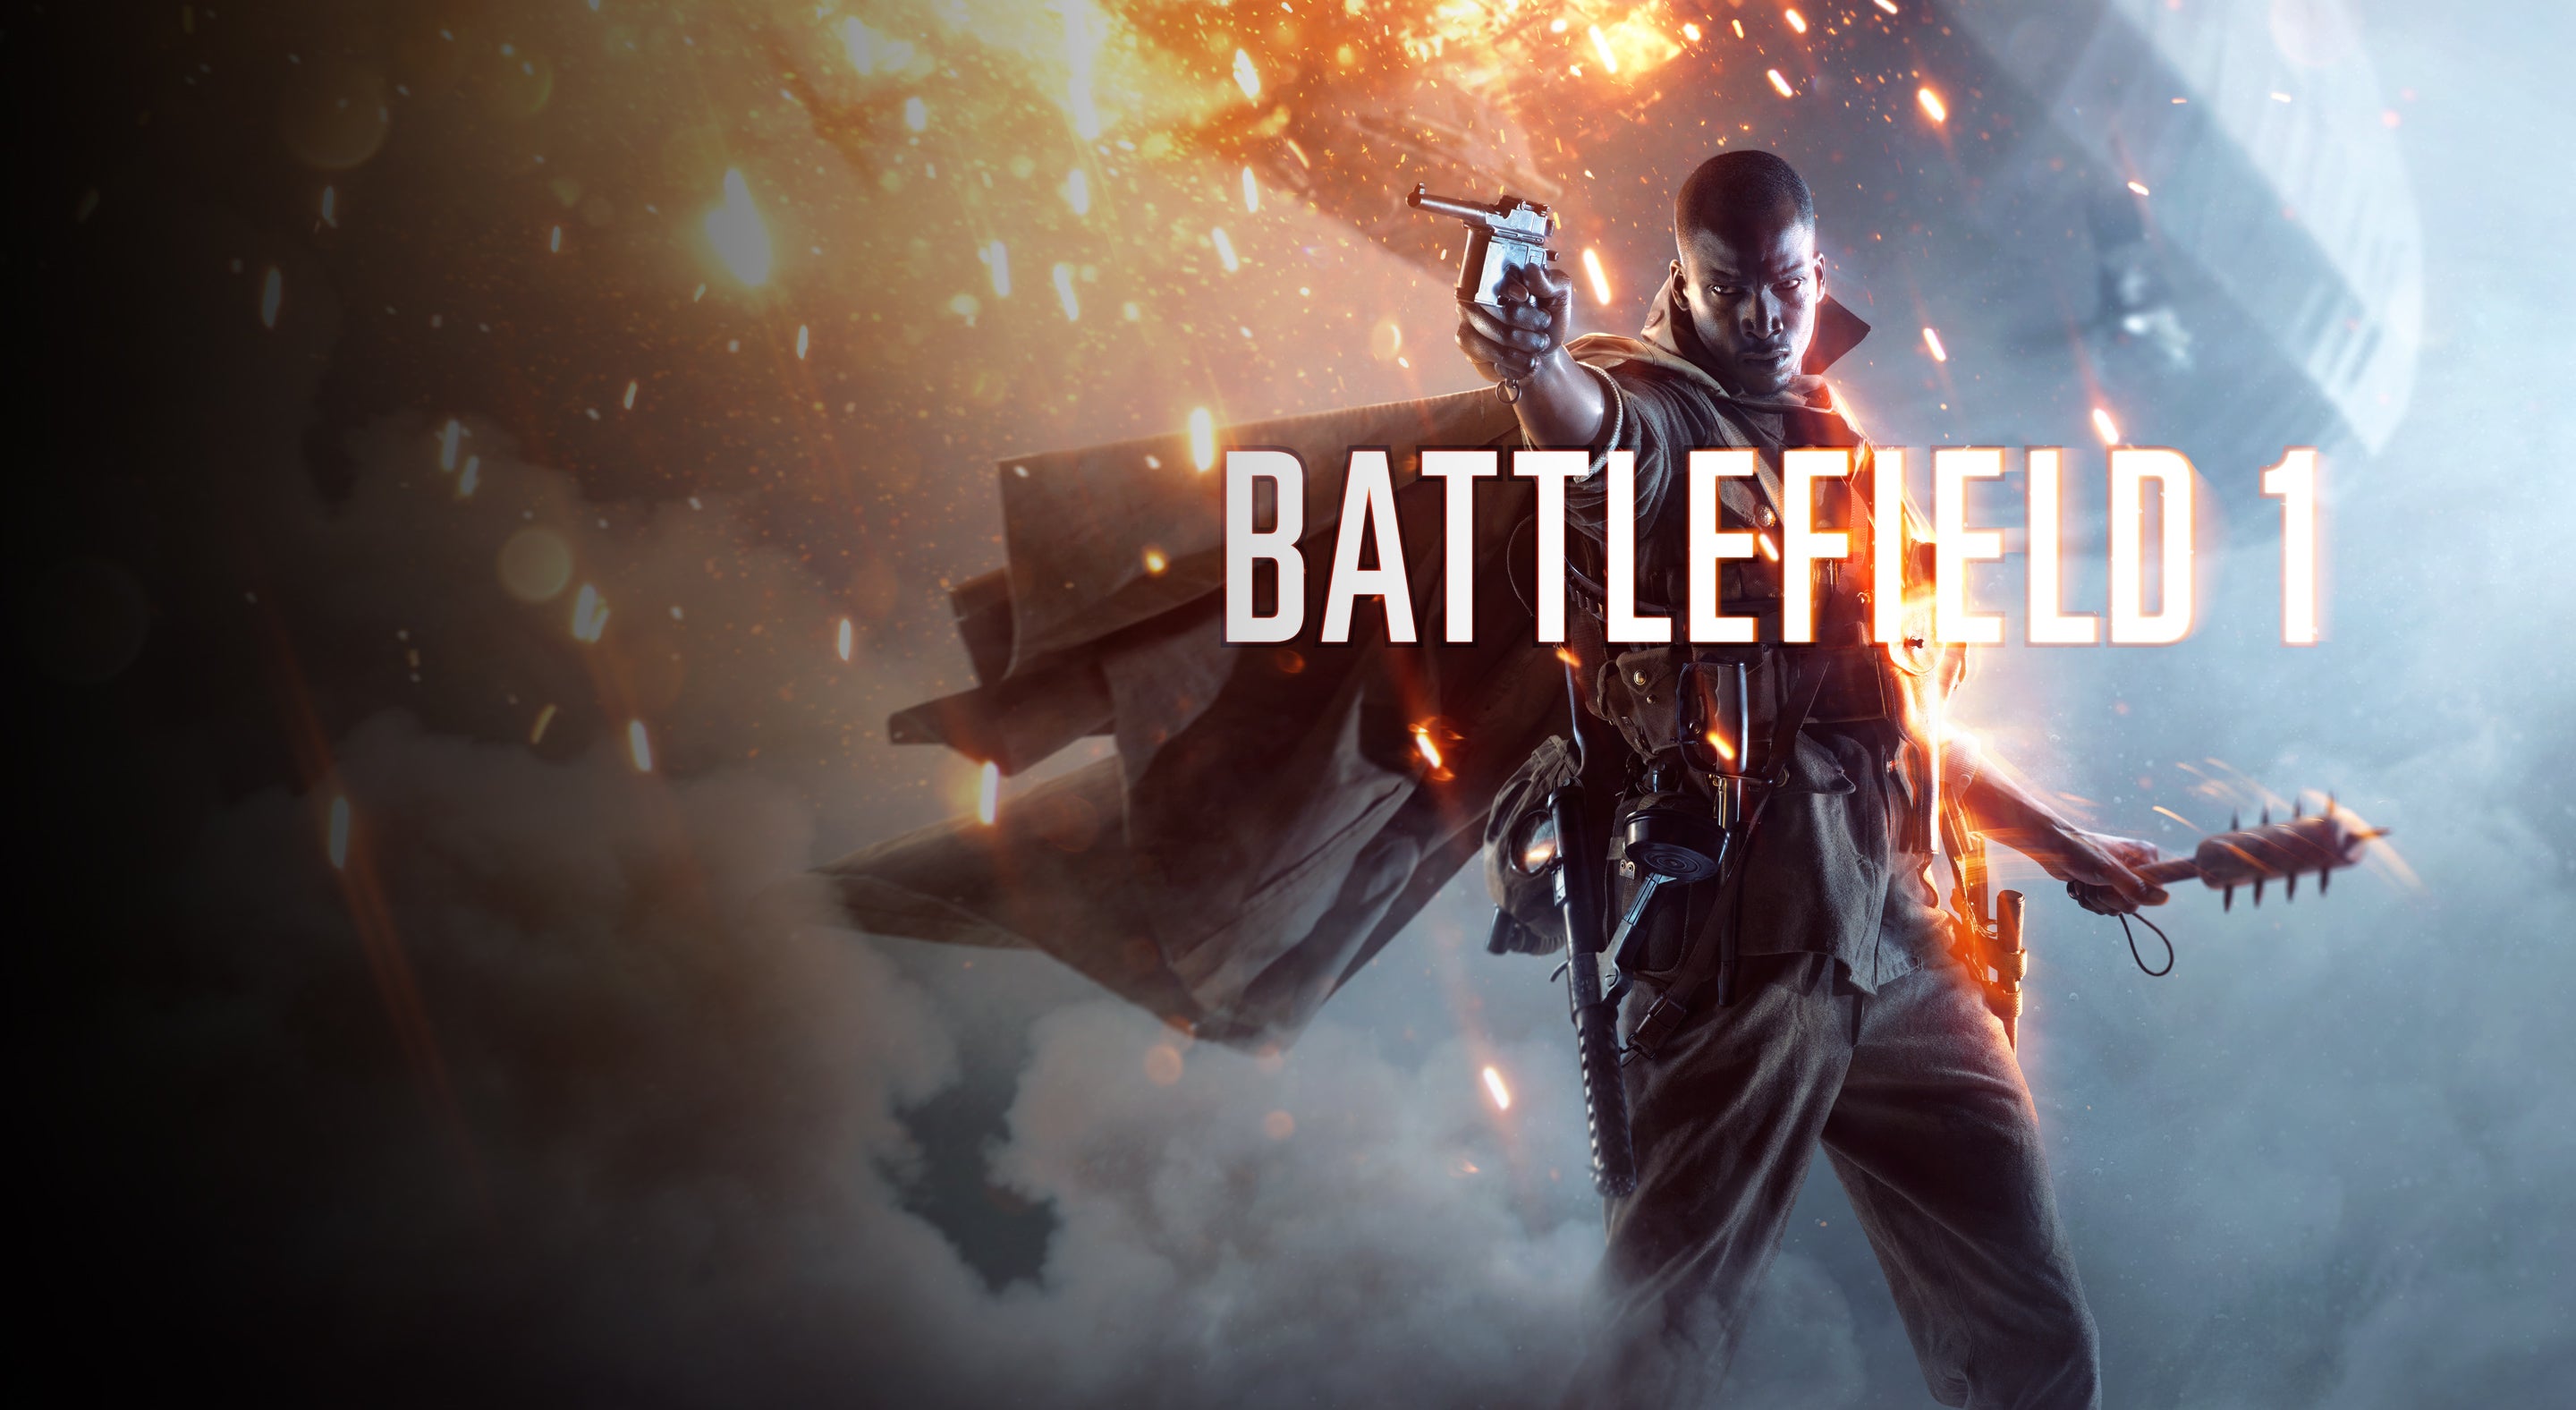 Image for Battlefield 1 is free on PC through Prime Gaming